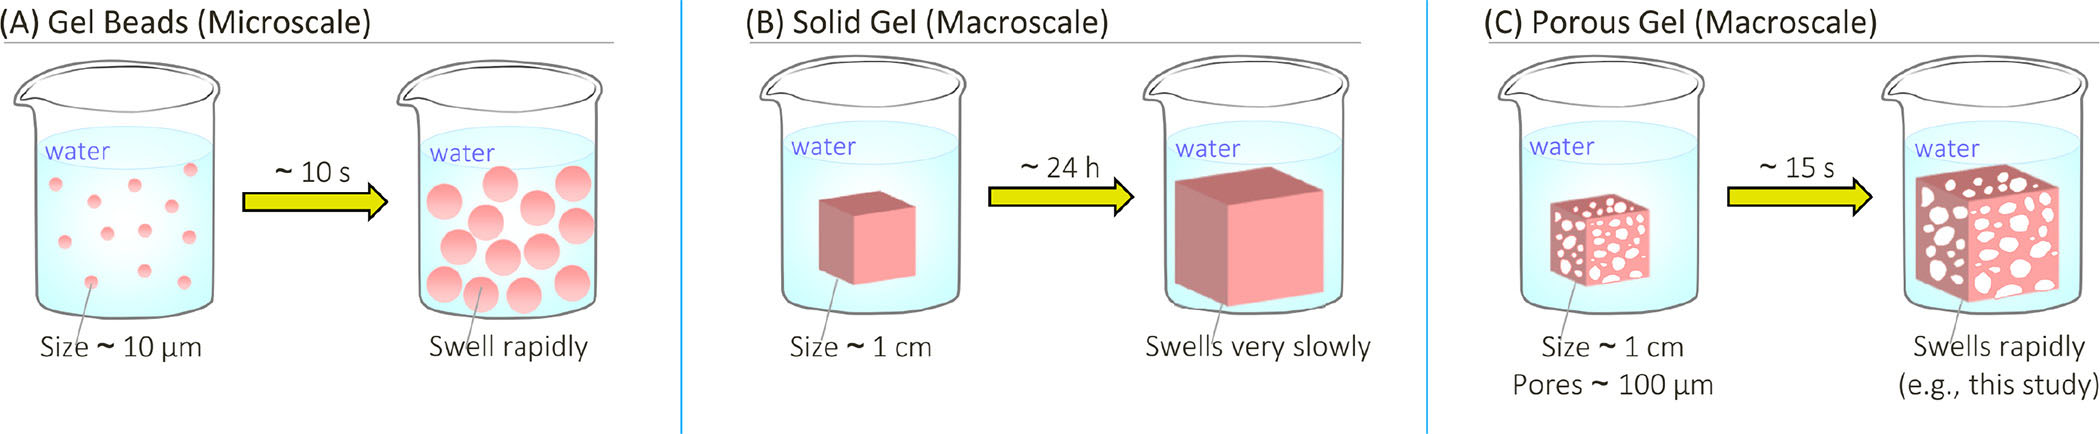 Gel-swelling dynamics at different length scales